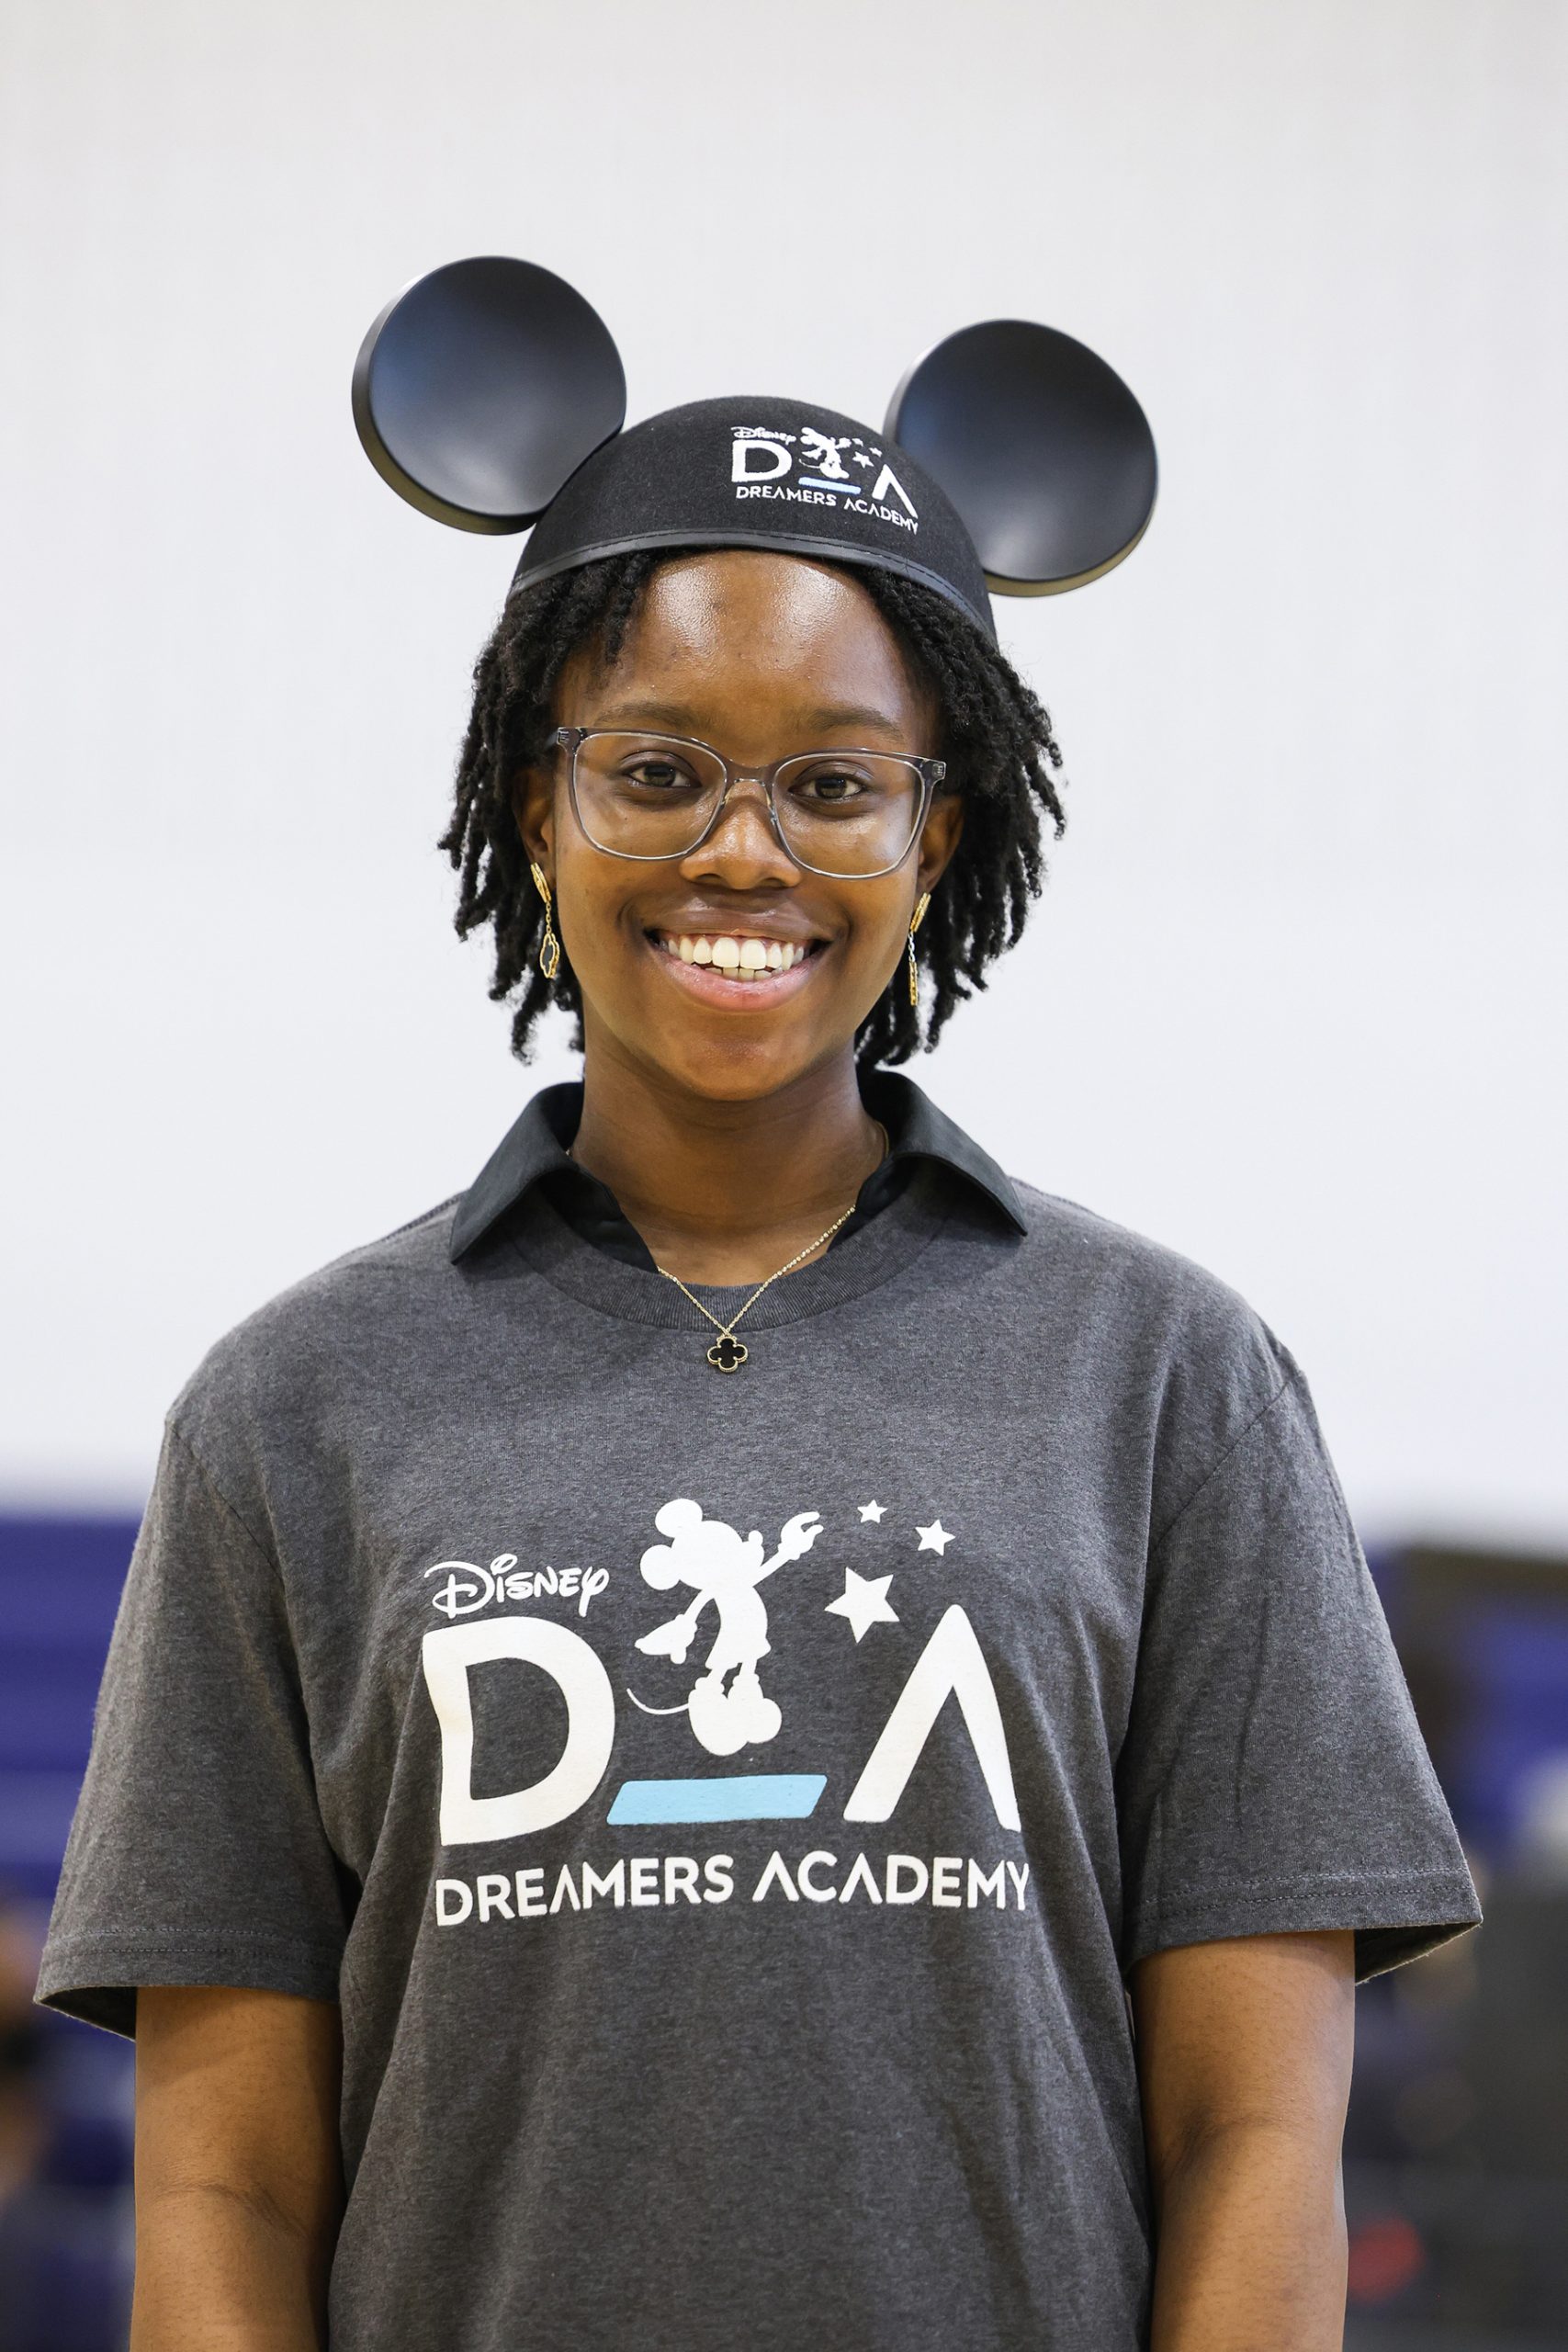 High school student Mosope Aina, an aspiring neurosurgeon, was surprised on national TV on January 13, 2023 at her school in Newark, N.J. with the news that she is one of 100 students selected for this year’s Disney Dreamers Academy at Walt Disney World Resort in Florida in March. Disney Dreamers Academy, taking place March 23-26, 2023 is a mentoring program hosted annually by Walt Disney World Resort that fosters the dreams of Black students and teens from underrepresented communities. (ABC/Michael Le Brecht II)